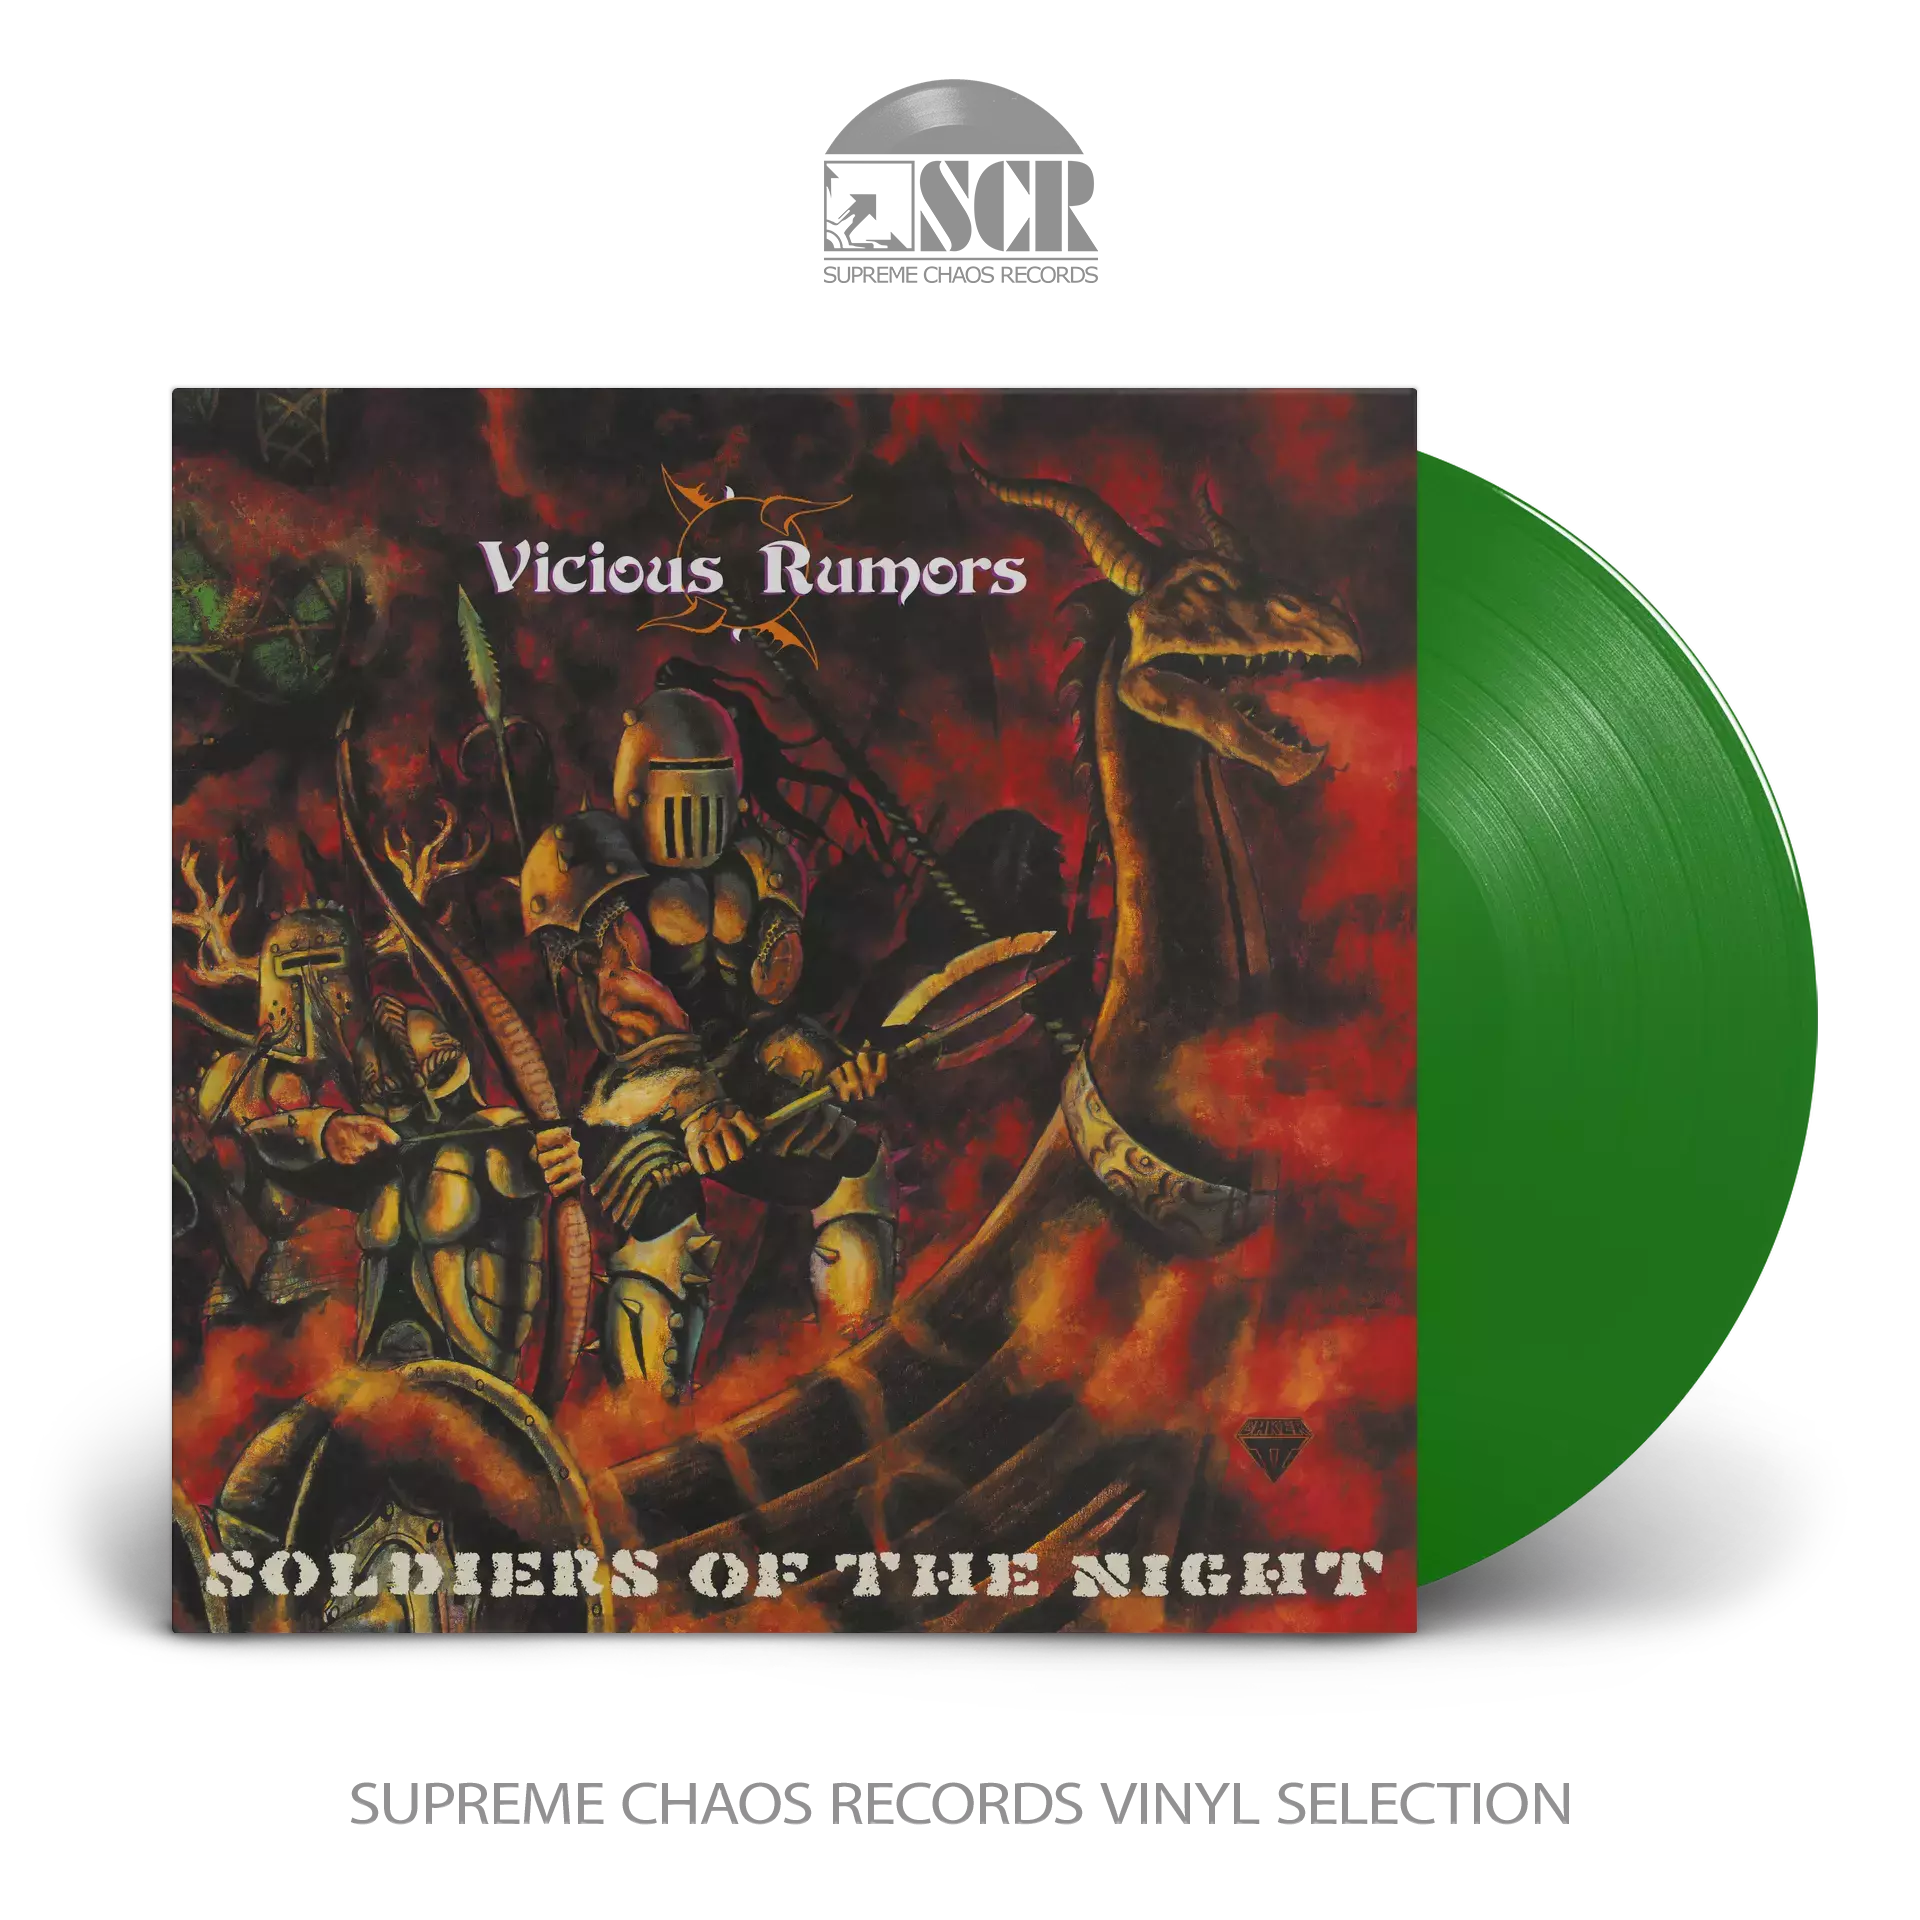 VICIOUS RUMORS - Soldiers Of The Night (Re-Issue) [TRANSPARENT GREEN LP]